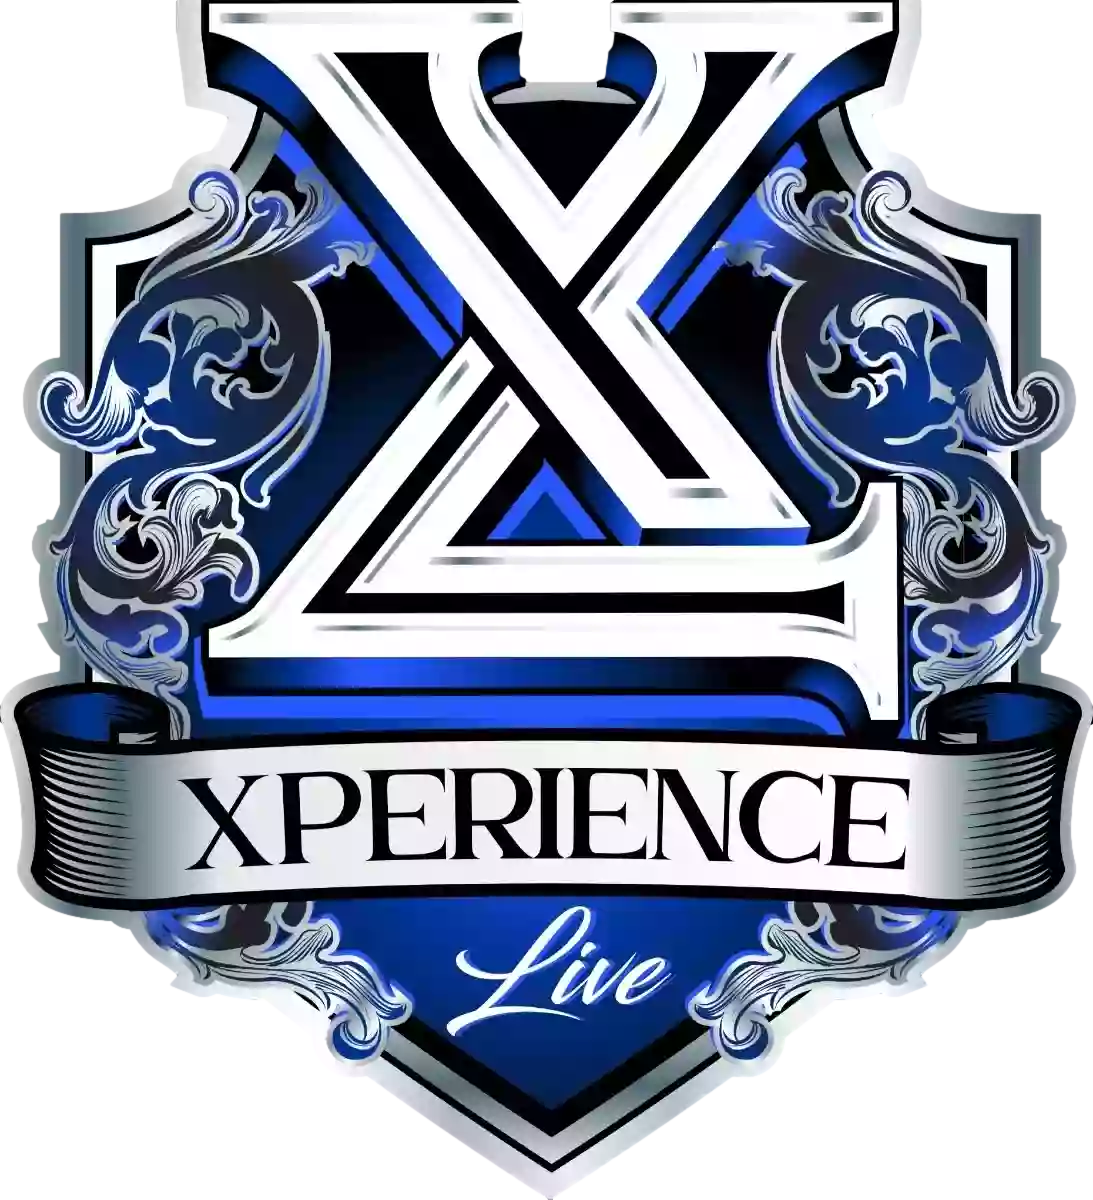 Xperience Live